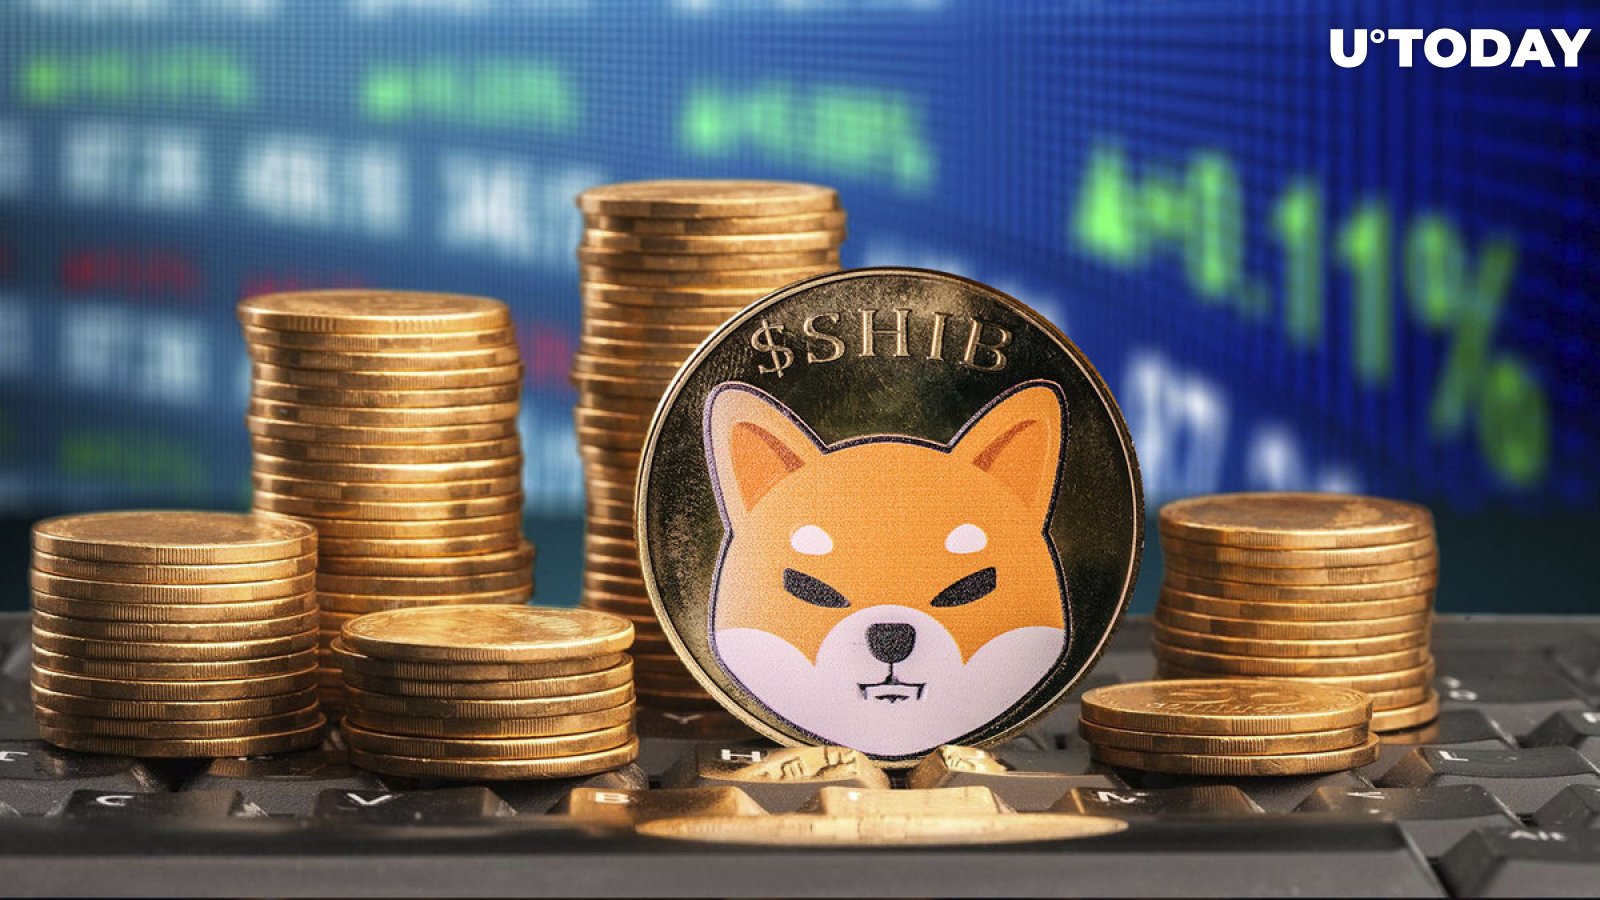 Shiba Inu (SHIB) Suddenly Gains 7% in an Hour, Here's What's Happening